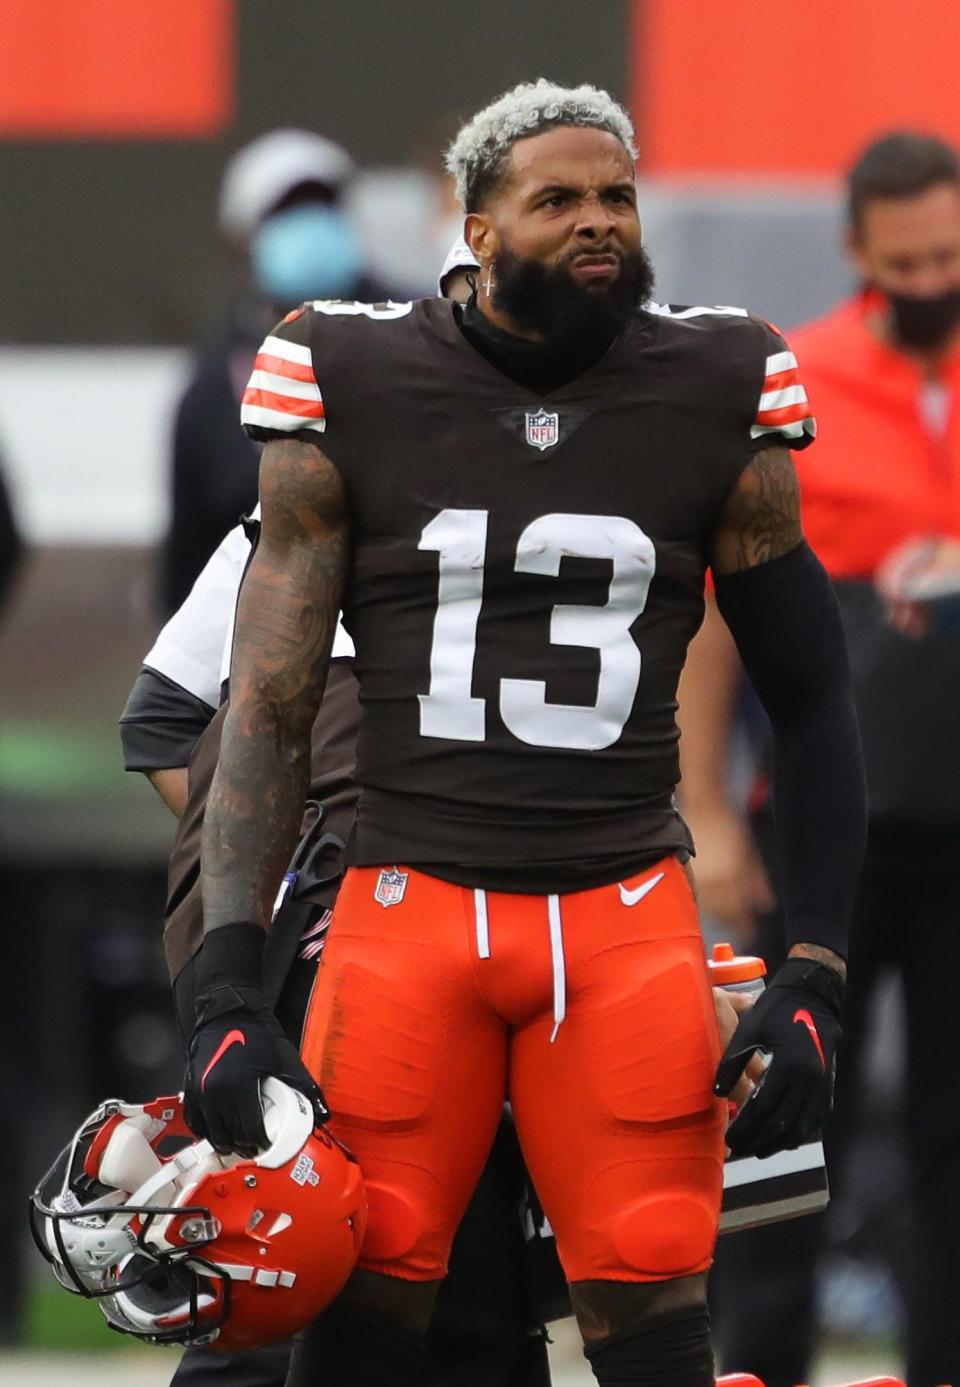 Browns wide receiver Odell Beckham Jr. (13) was excused from practice Wednesday and his future with the team is in question. [Jeff Lange/Beacon Journal]